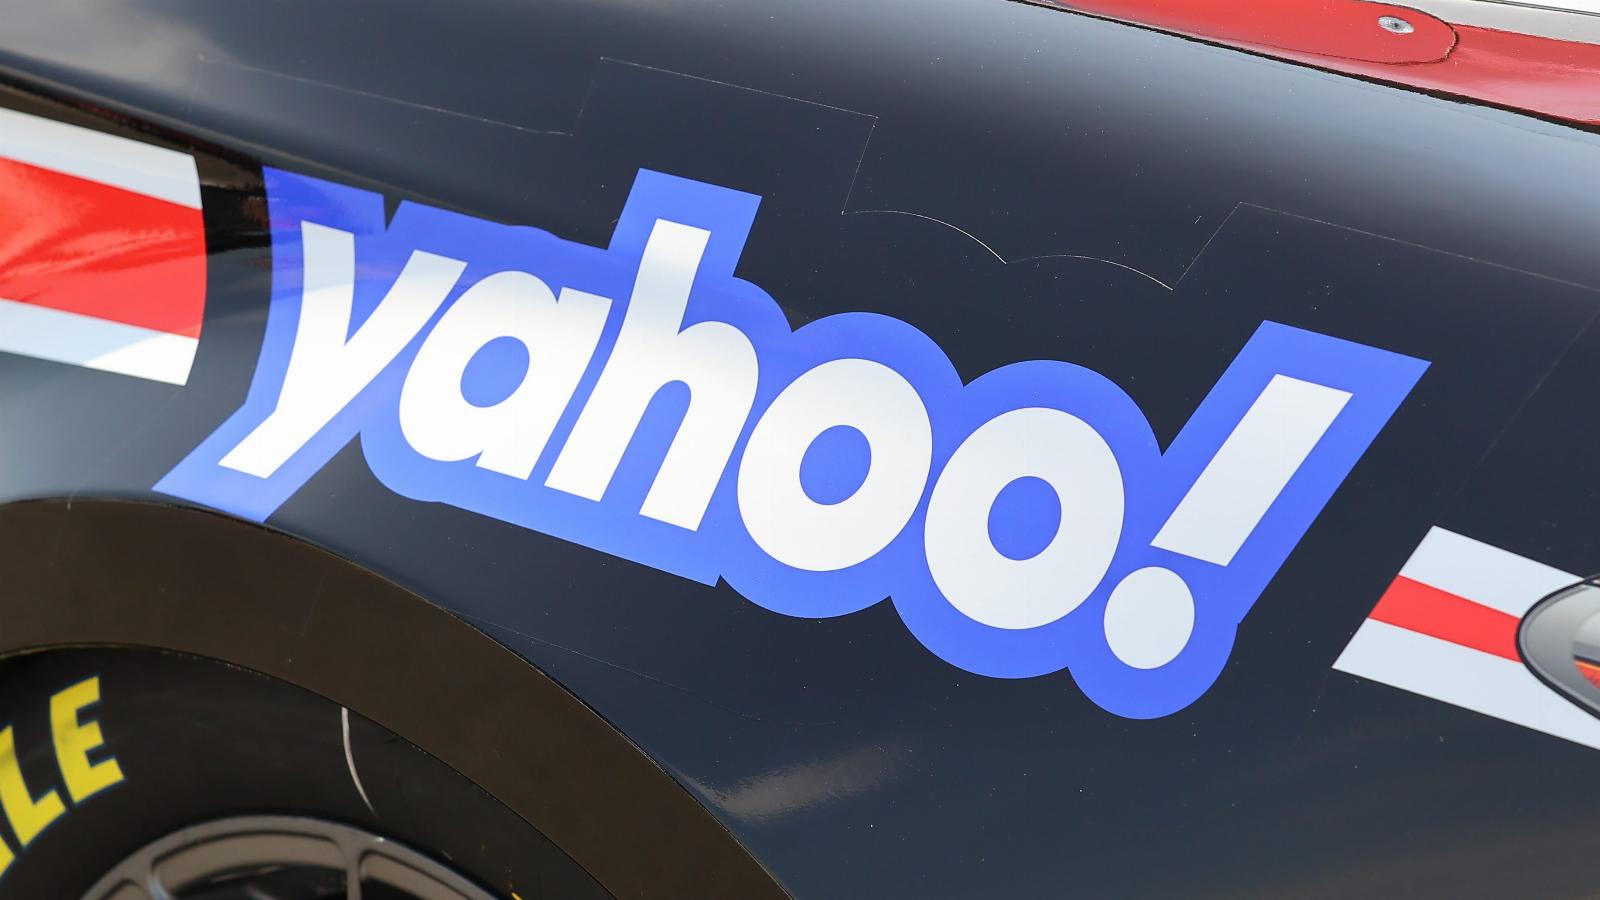 Yahoo acquires social sports betting app Wagr